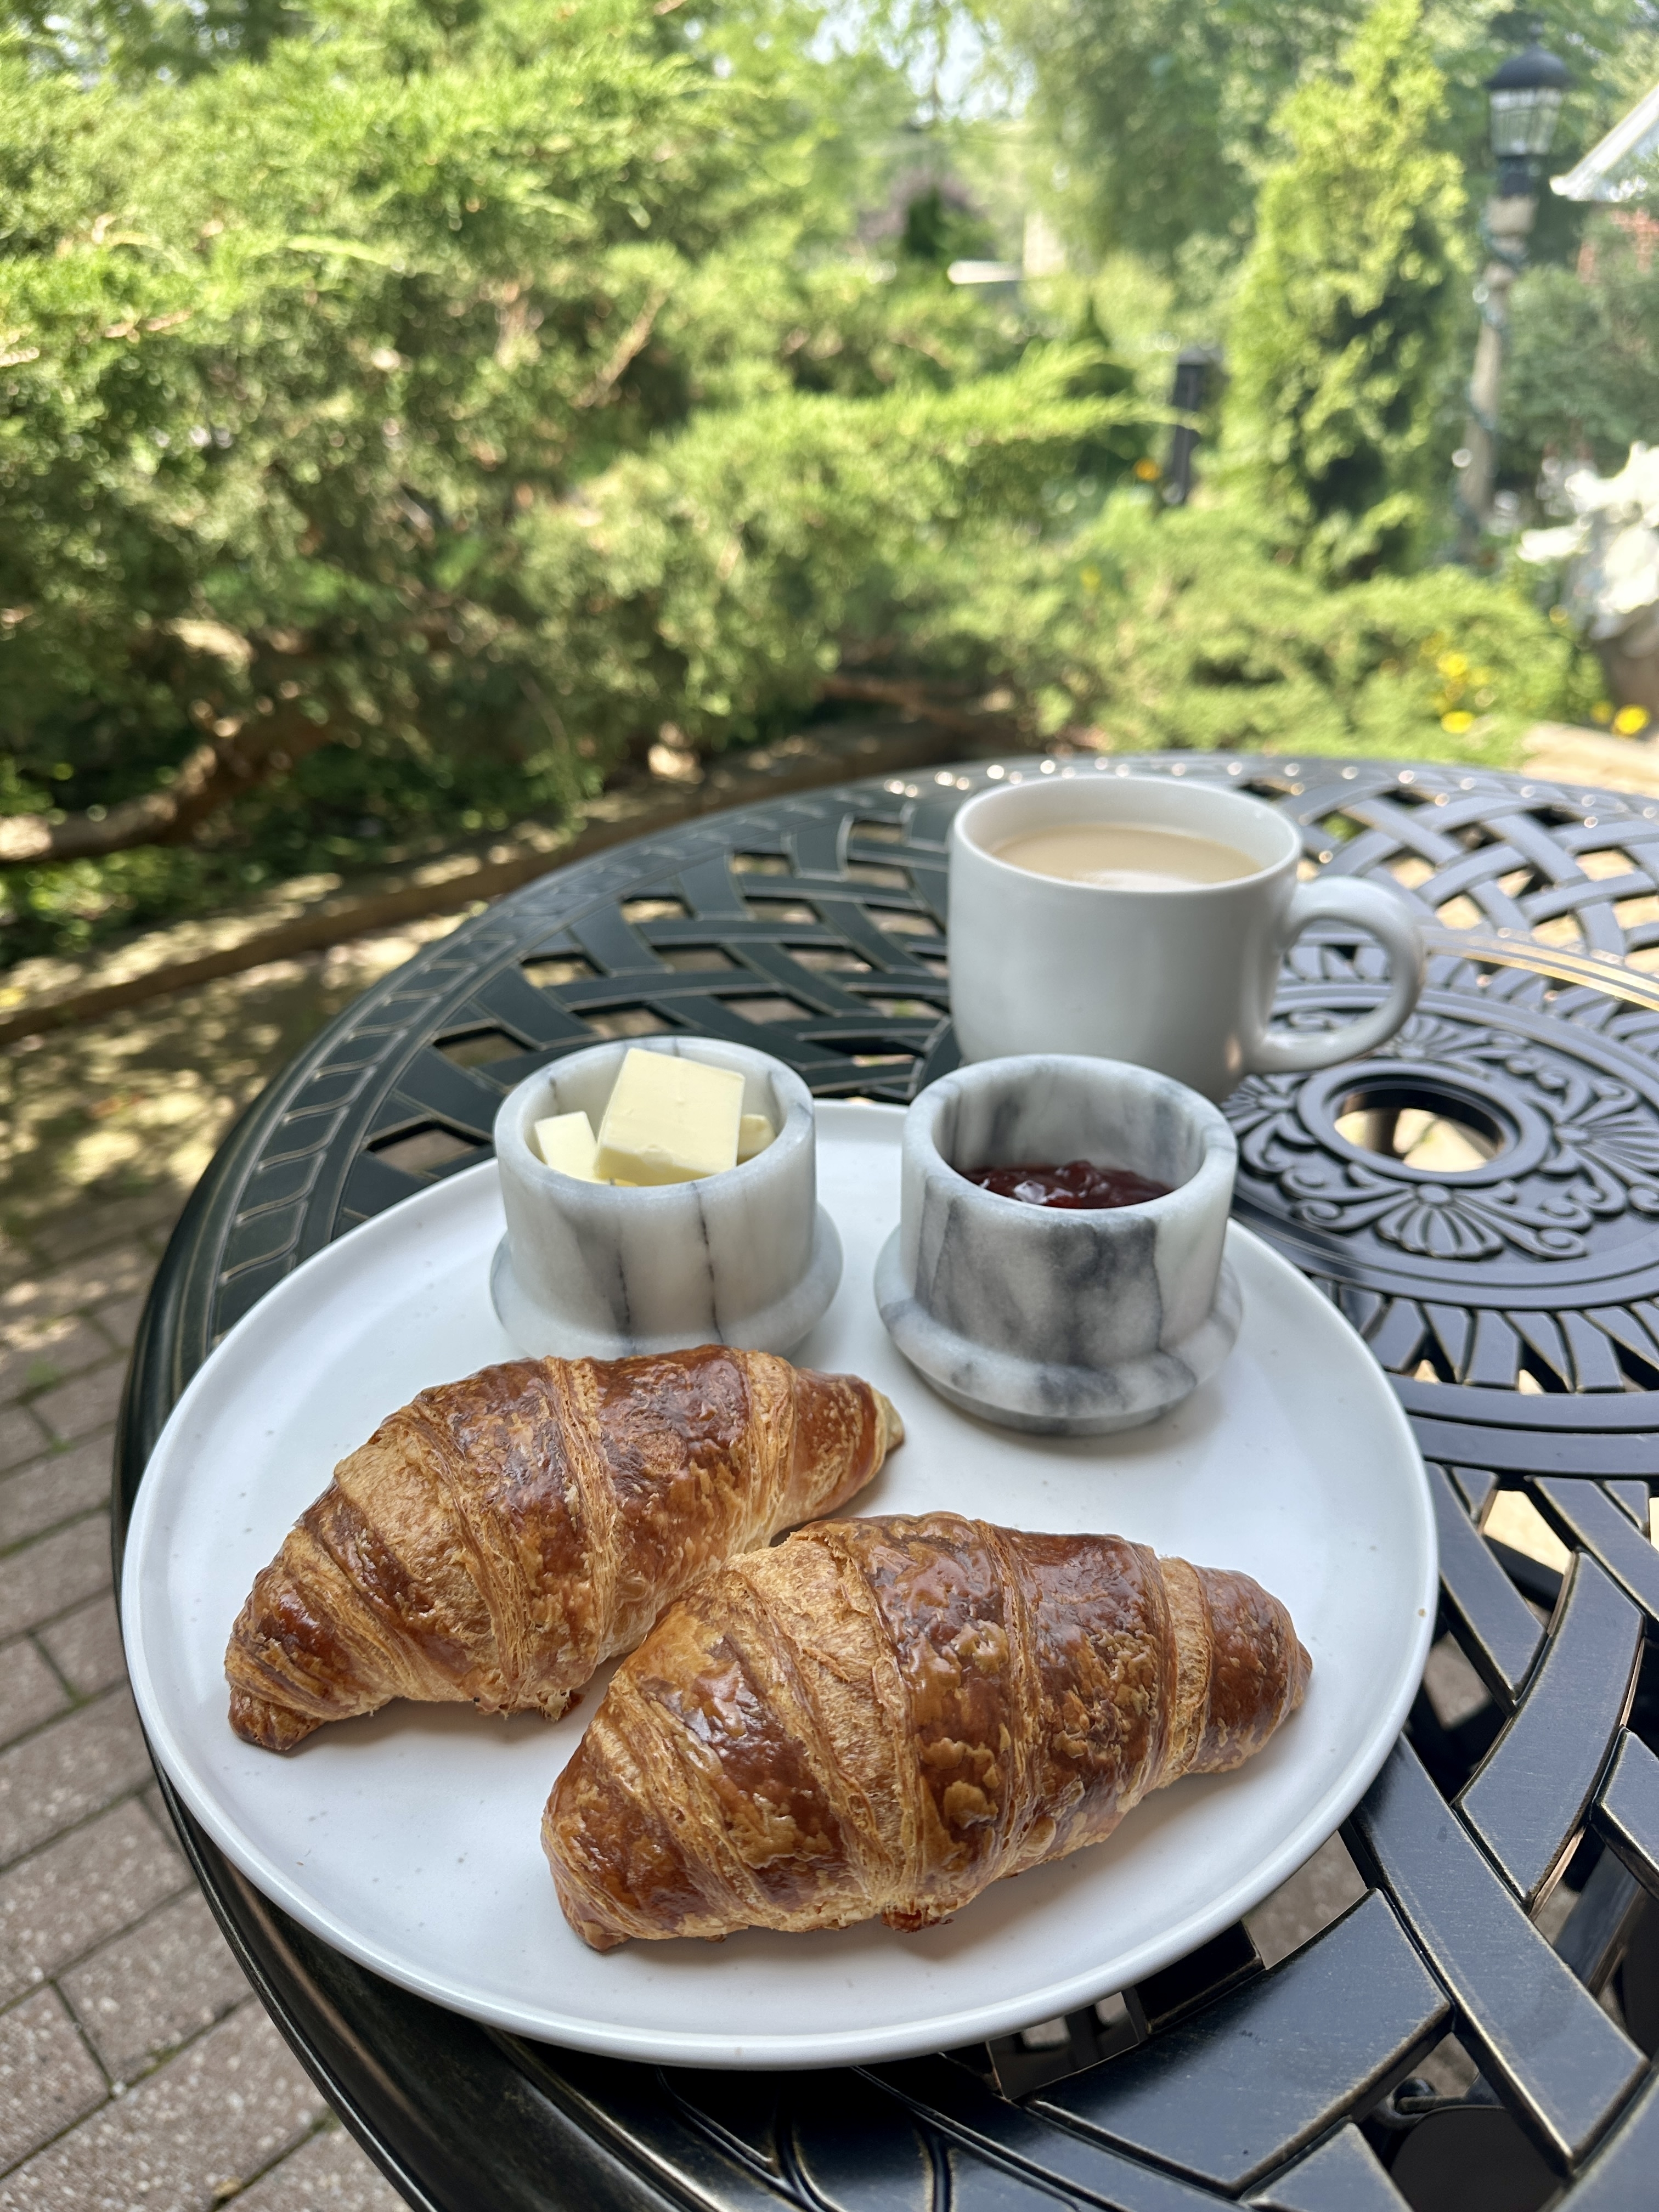 Croissants, jam, and coffee on a table outdoors.